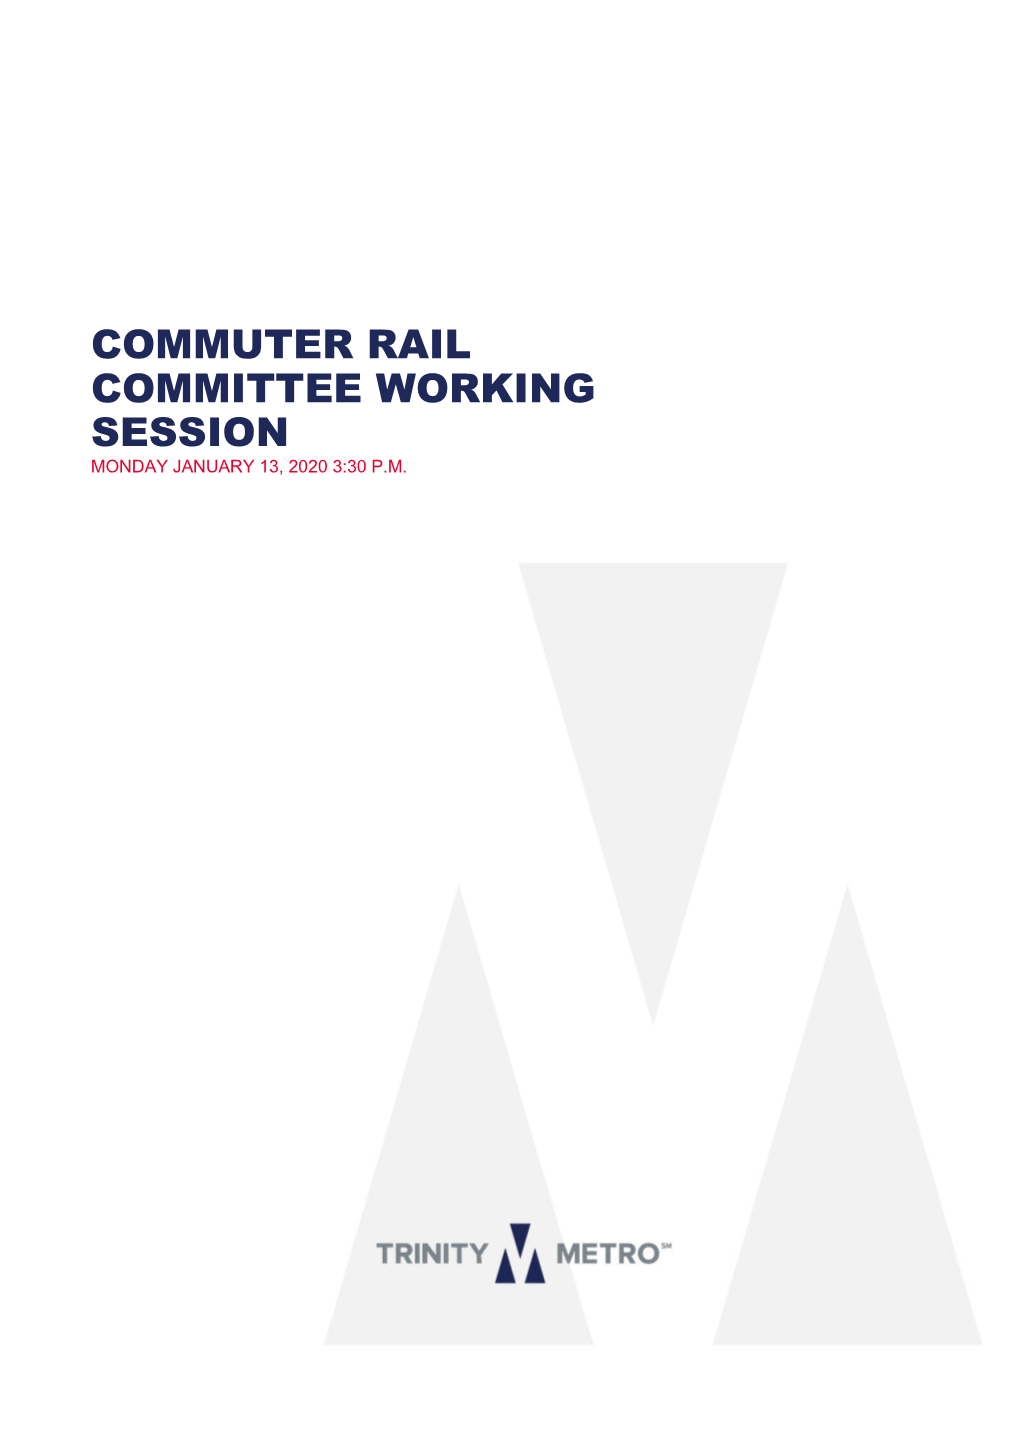 Commuter Rail Committee Working Session Monday January 13, 2020 3:30 P.M